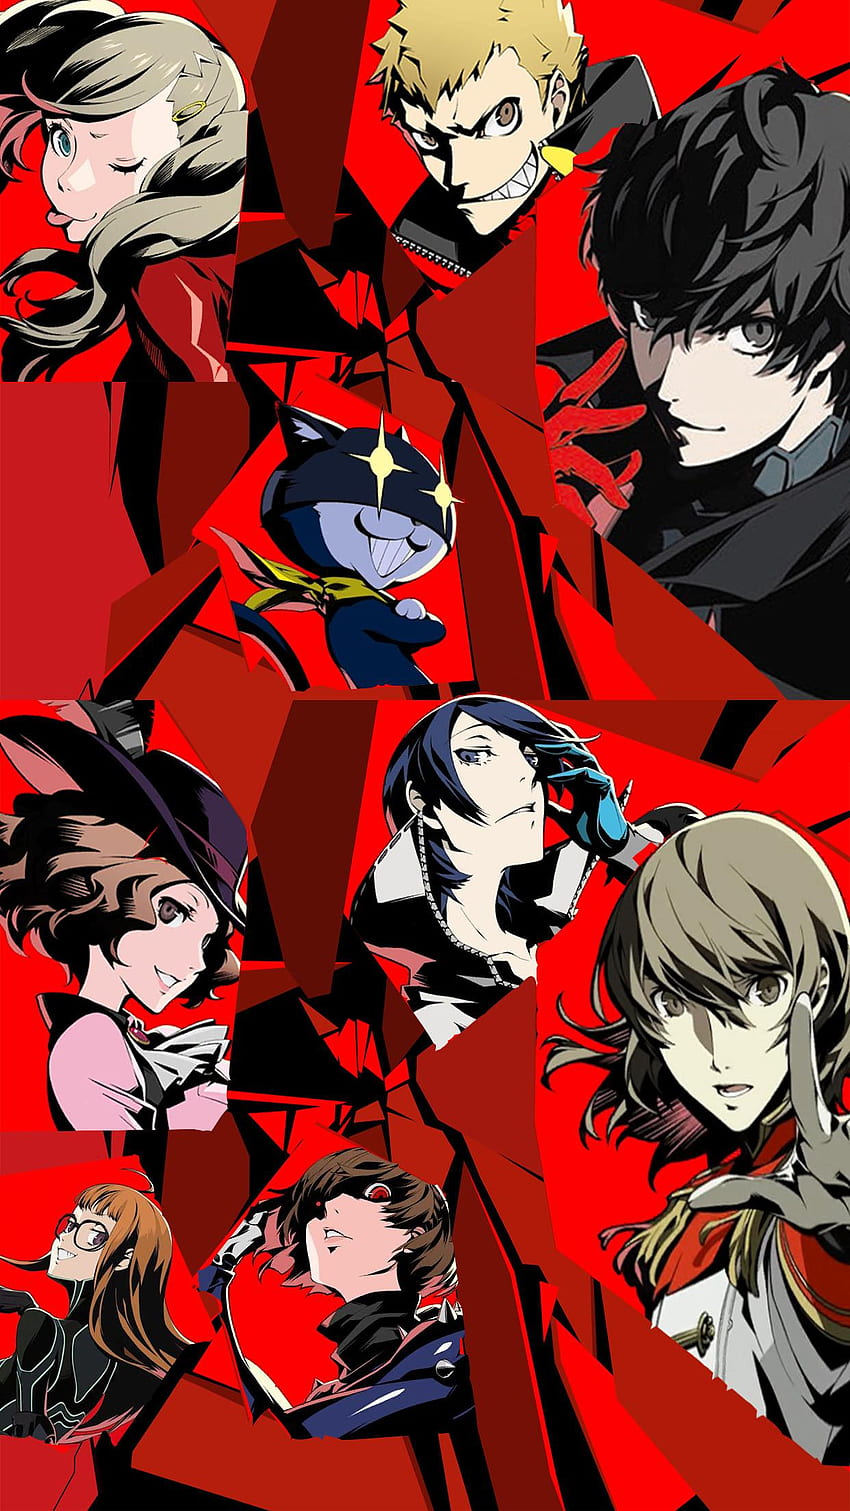 Persona 5 Joker Wallpapers for Phone  Aesthetic Anime Wallpapers